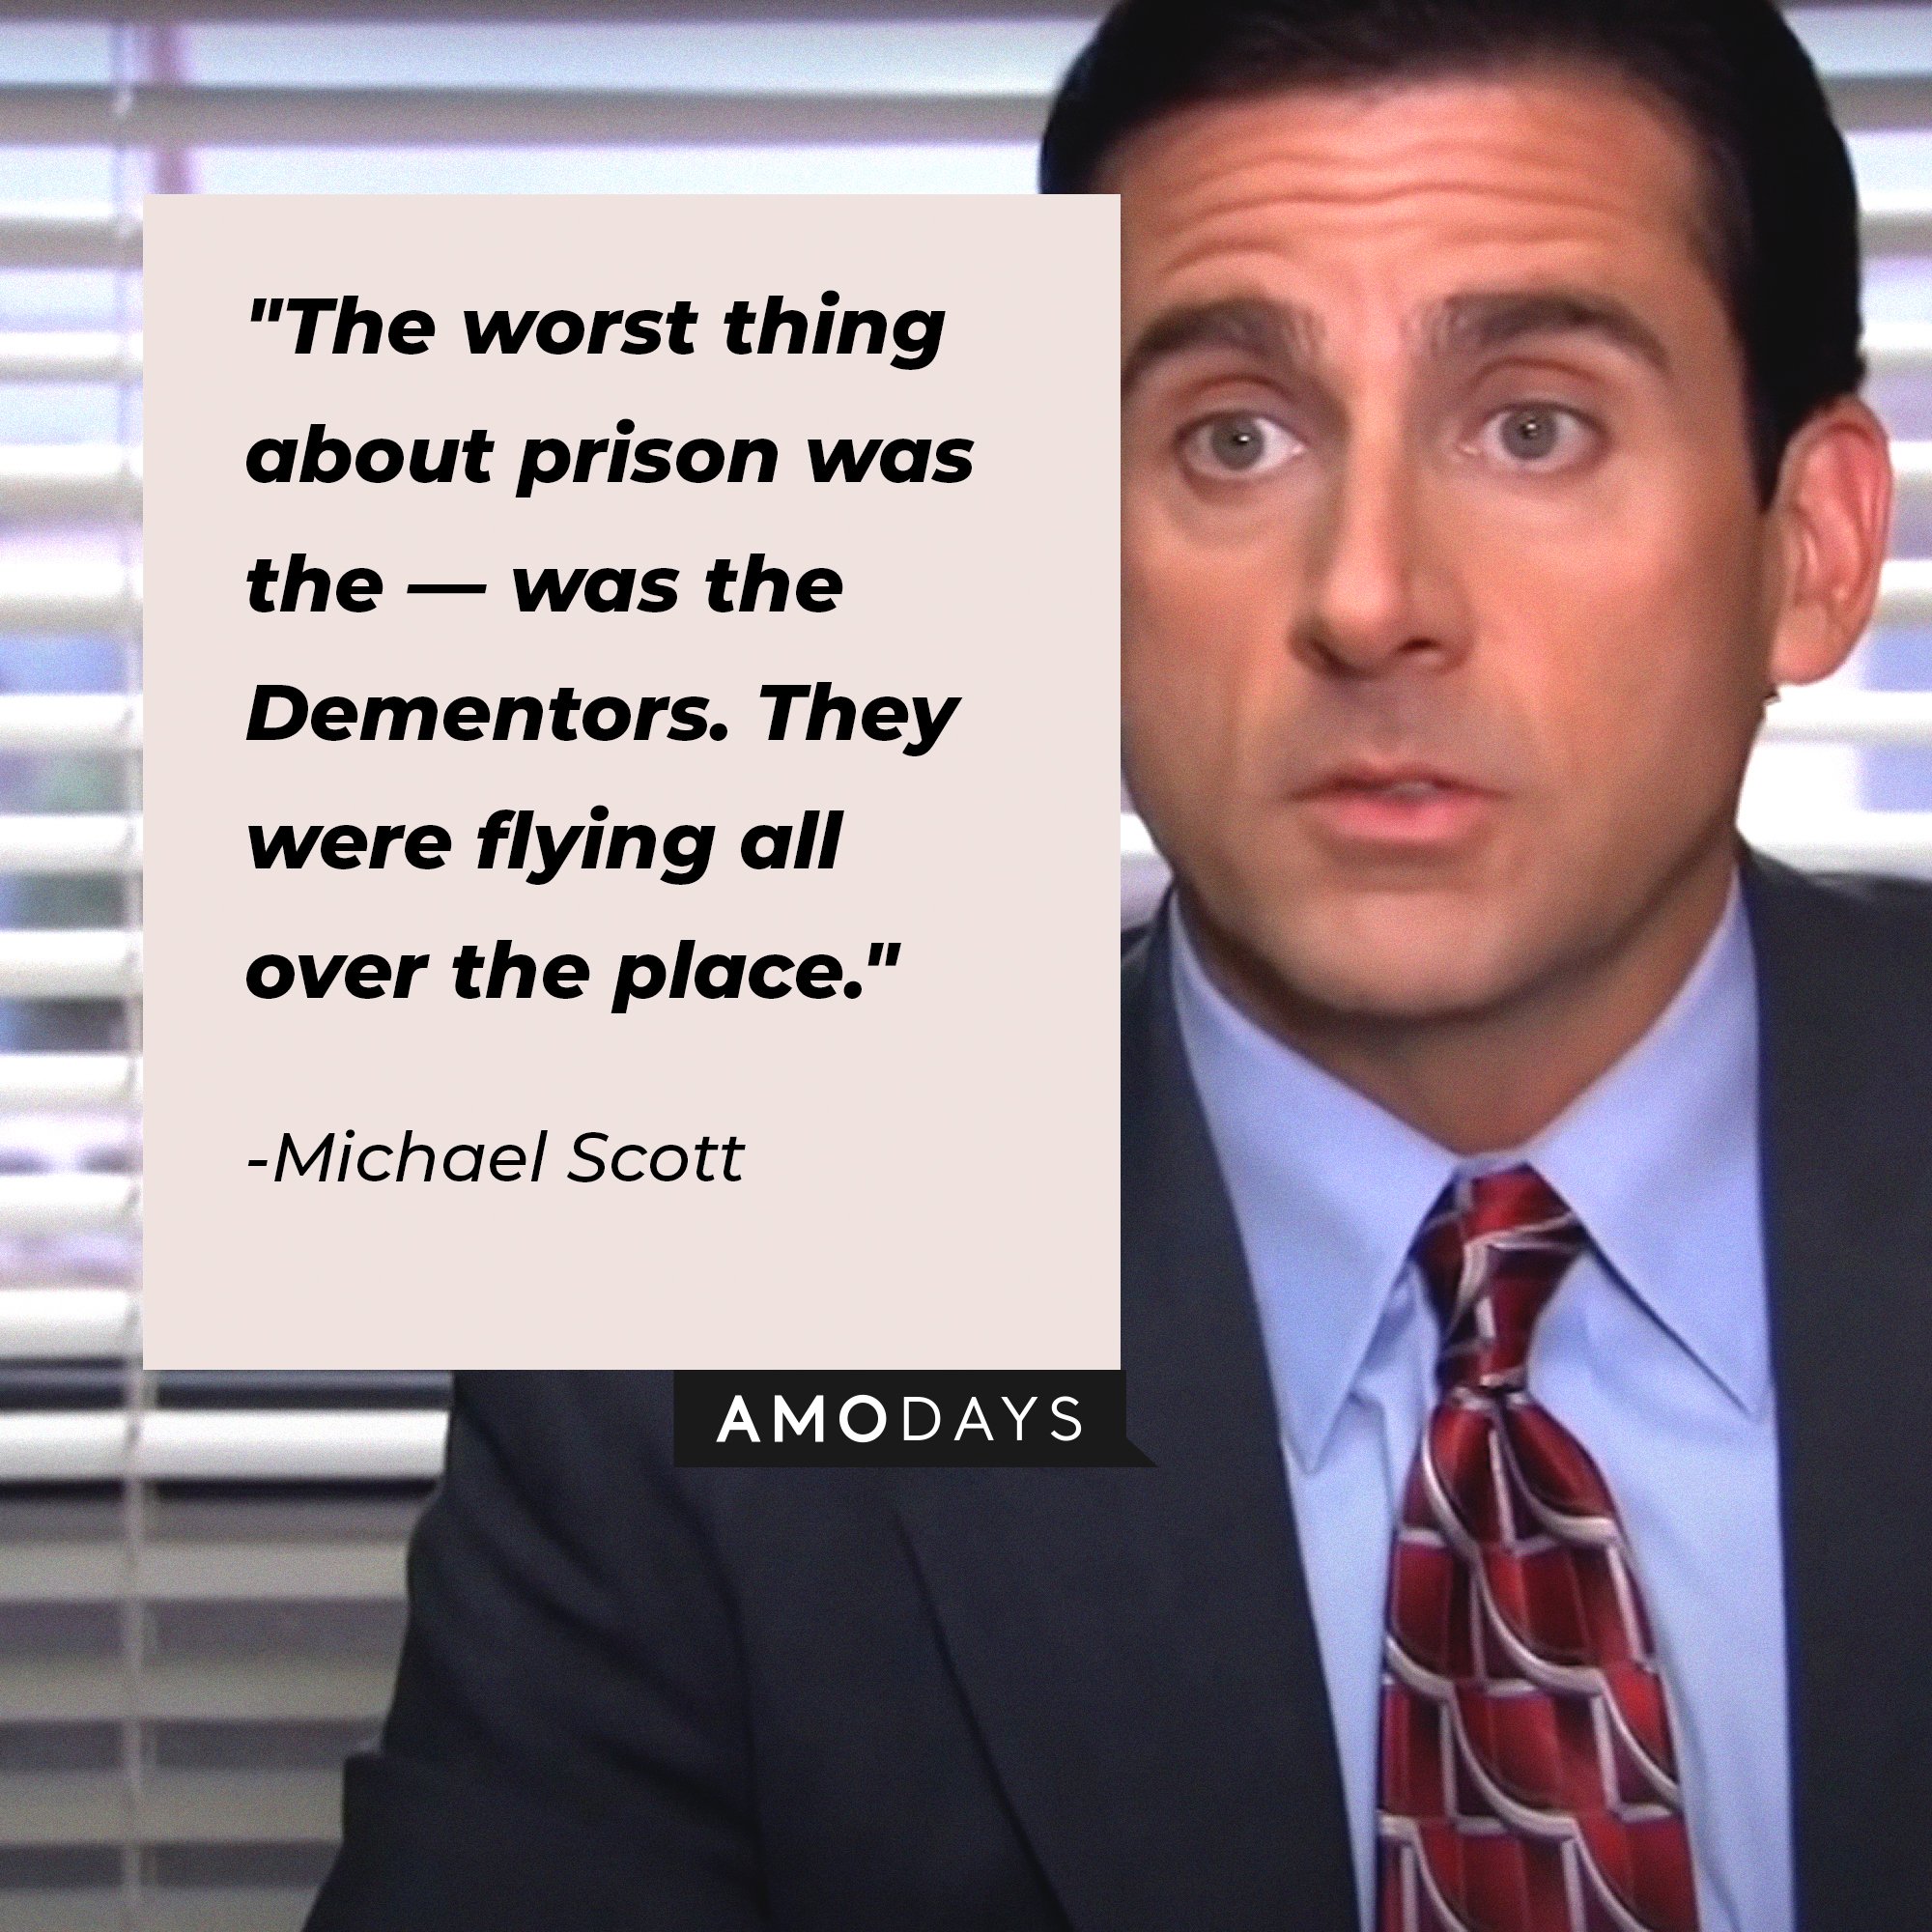 Michael Scott’s quote: "The worst thing about prison was the — was the Dementors. They were flying all over the place.” | Image: AmoDays